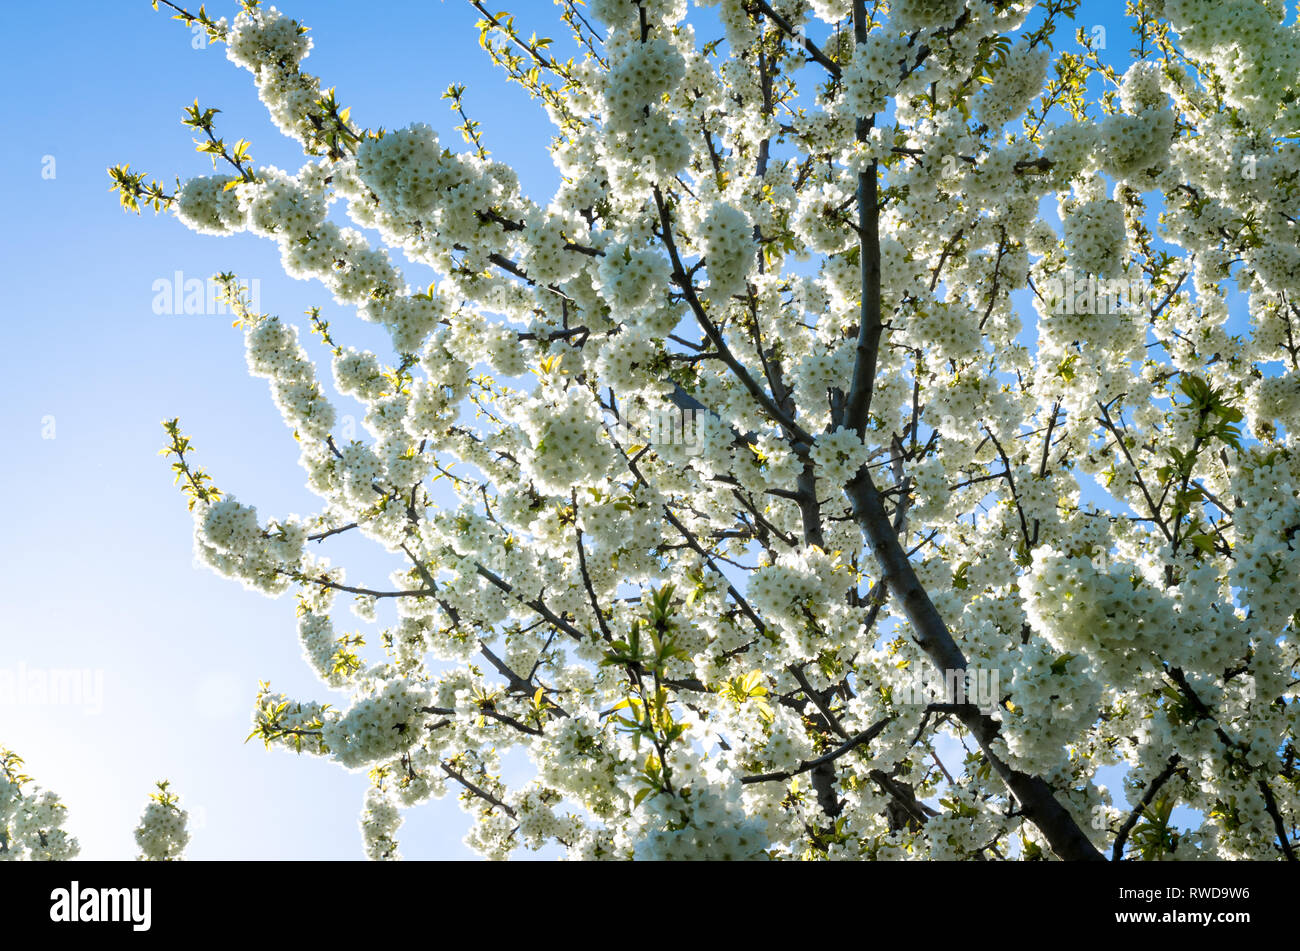 tree with blossoming white flowers in spring season Stock Photo